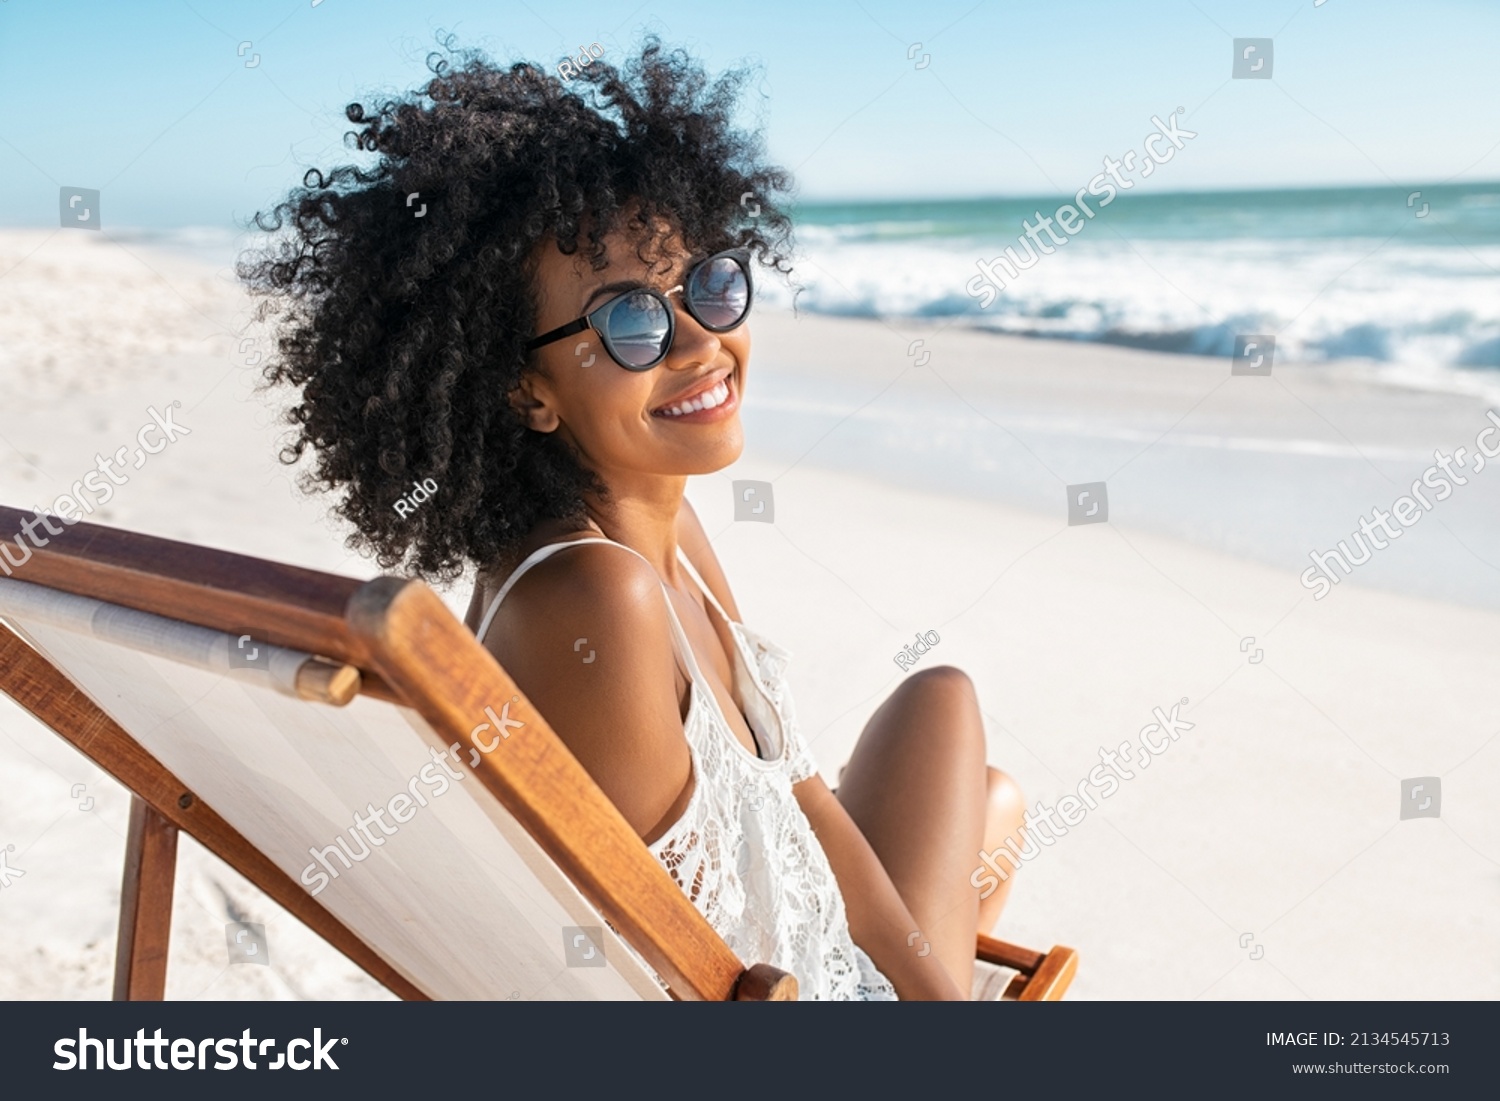 Portrait of happy young black woman relaxing on wooden deck chair at tropical beach while looking at camera wearing spectacles. Smiling african american girl with fashion sunglasses enjoying vacation. #2134545713